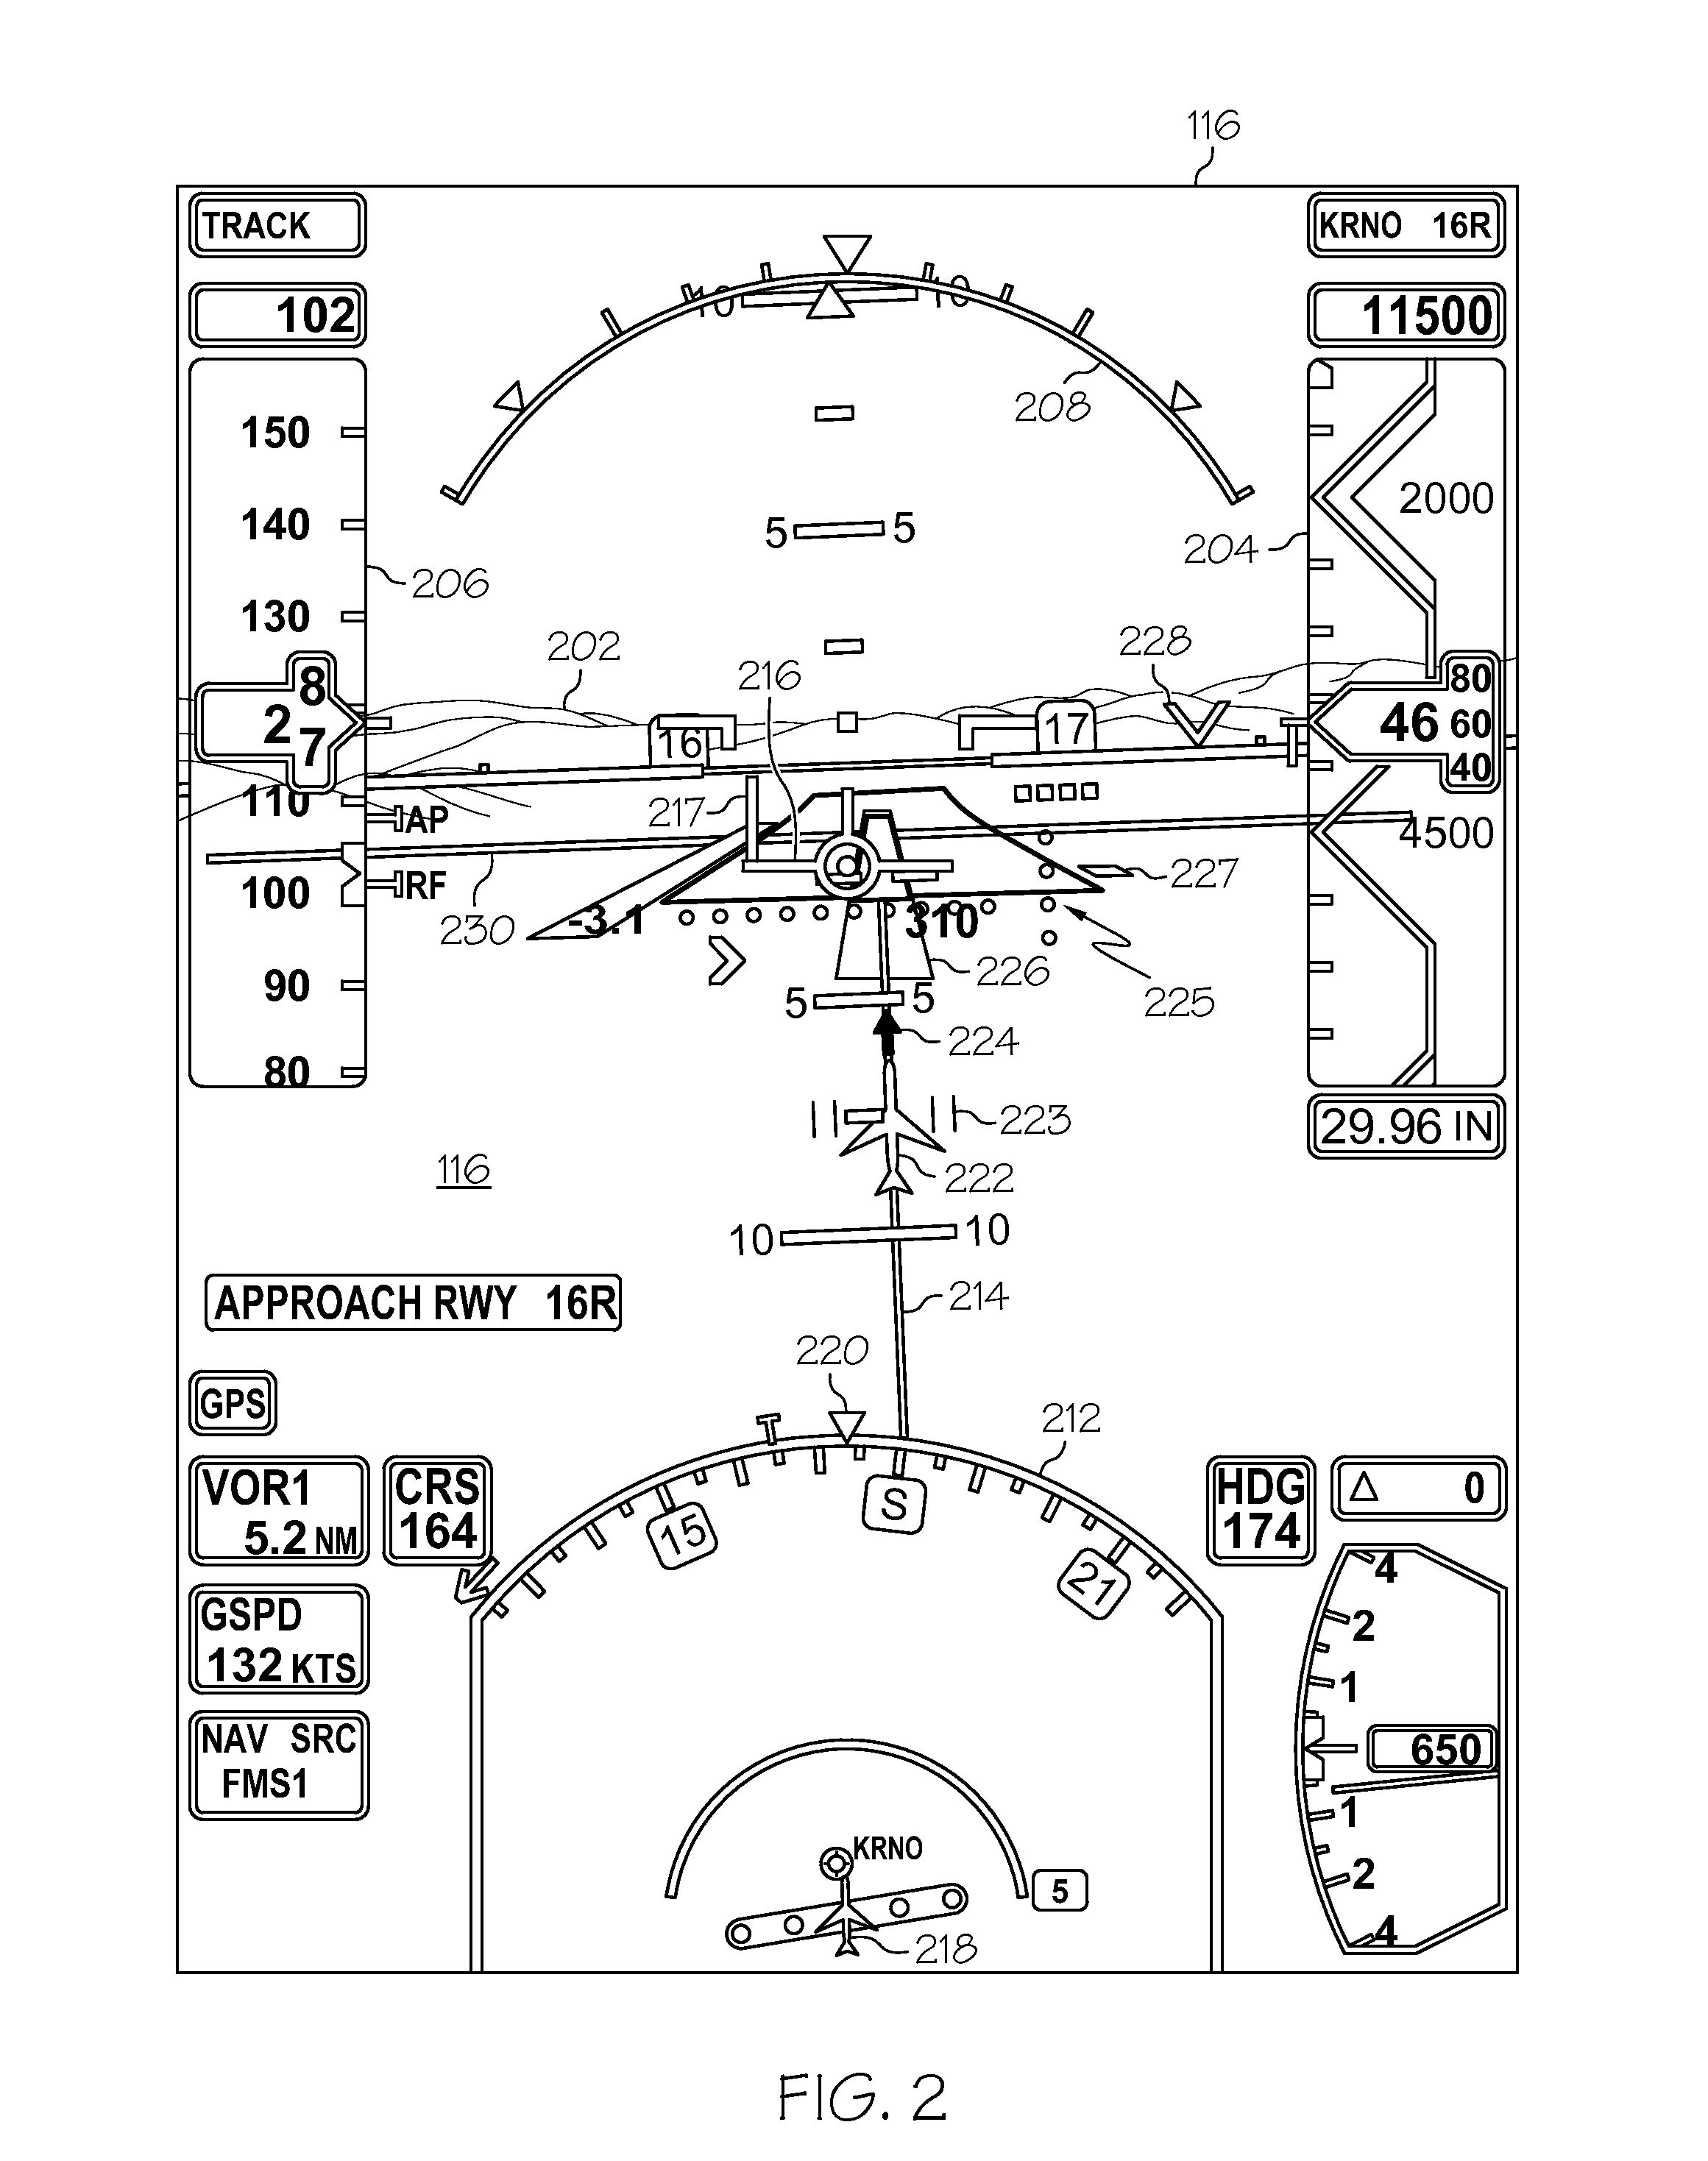 Aircraft synthetic vision systems utilizing data from local area augmentation systems, and methods for operating such aircraft synthetic vision systems